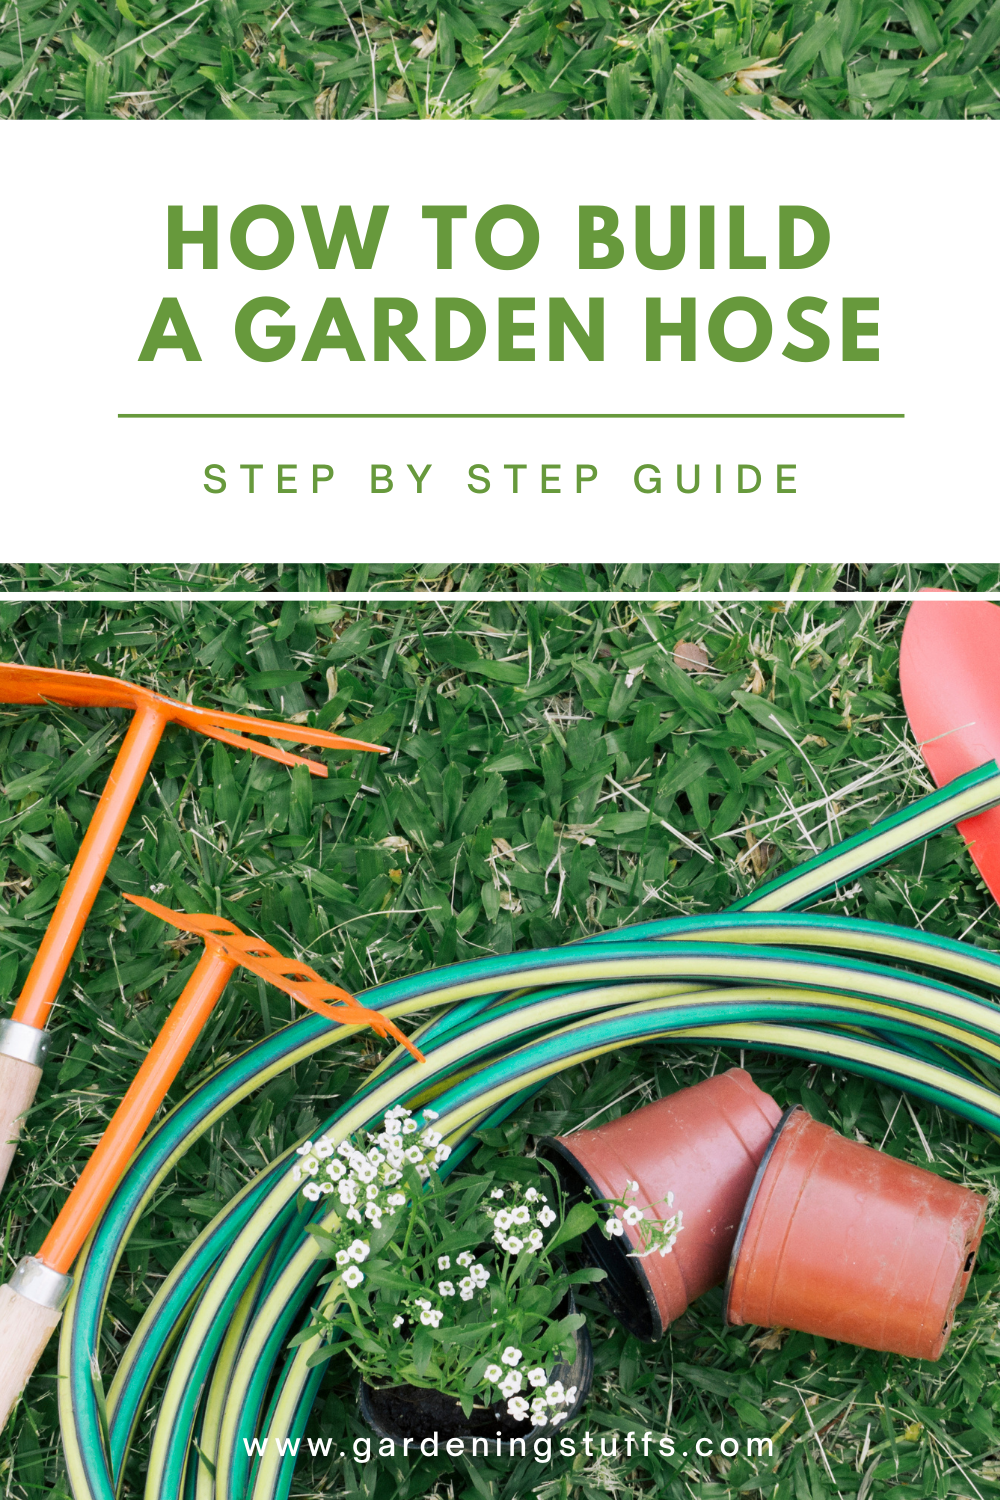 Some garden may require a smaller hose and the others might require a longer hose. Also, the pressure requirements may also vary. Read on how to build DIY hose to meet these custom garden requirements.